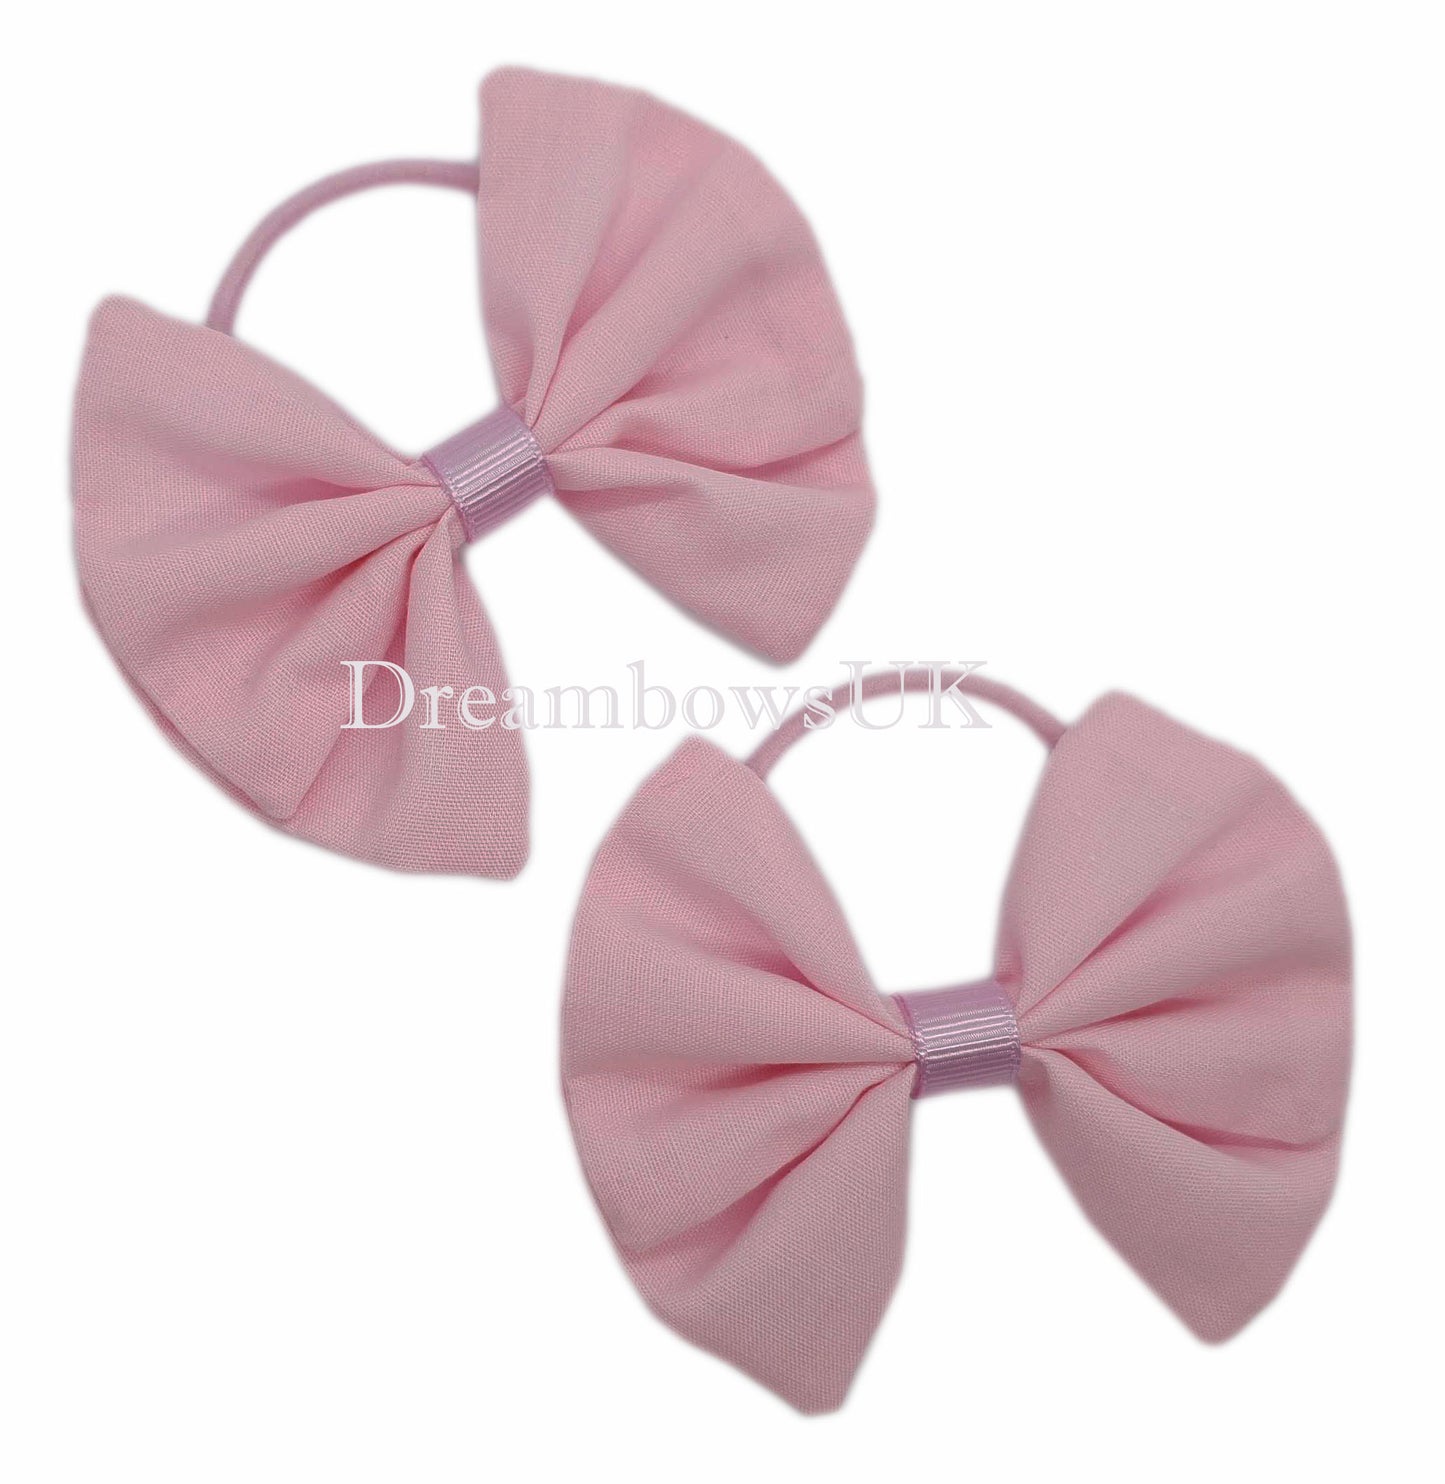 Girls baby pink fabric hair bows on thin hair bobbles